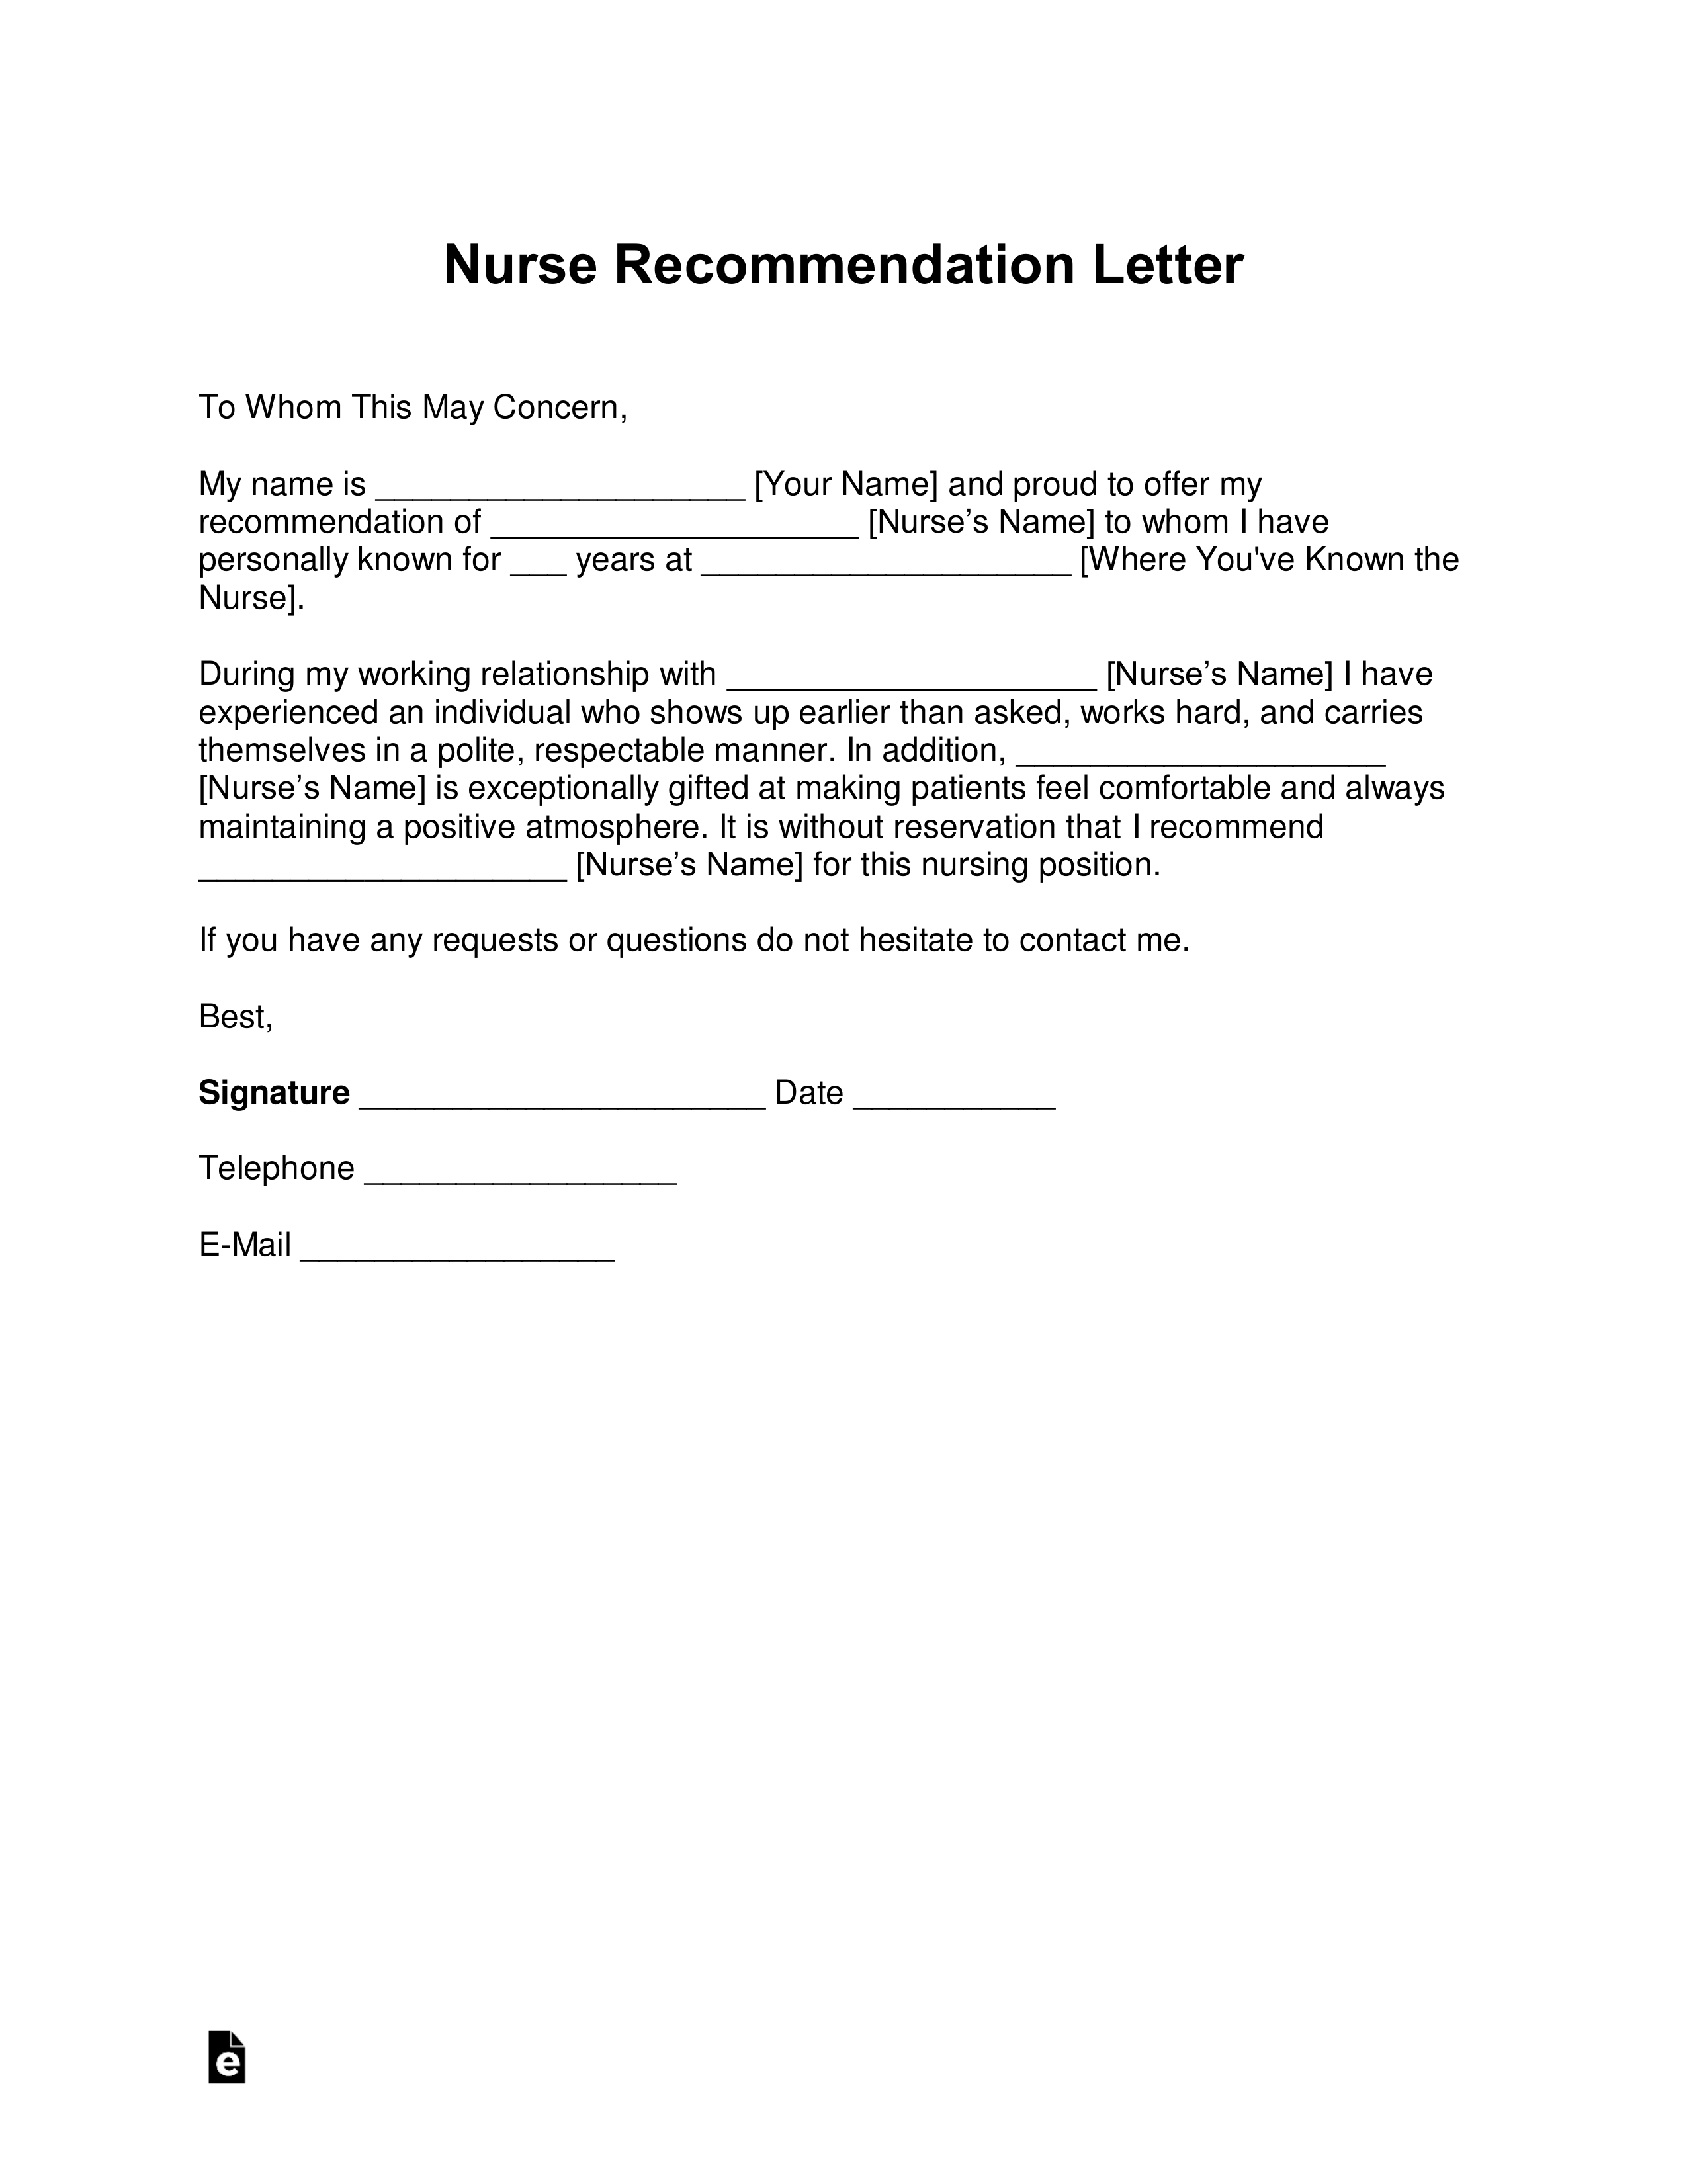 Sample Reference Letter For A Coworker from eforms.com